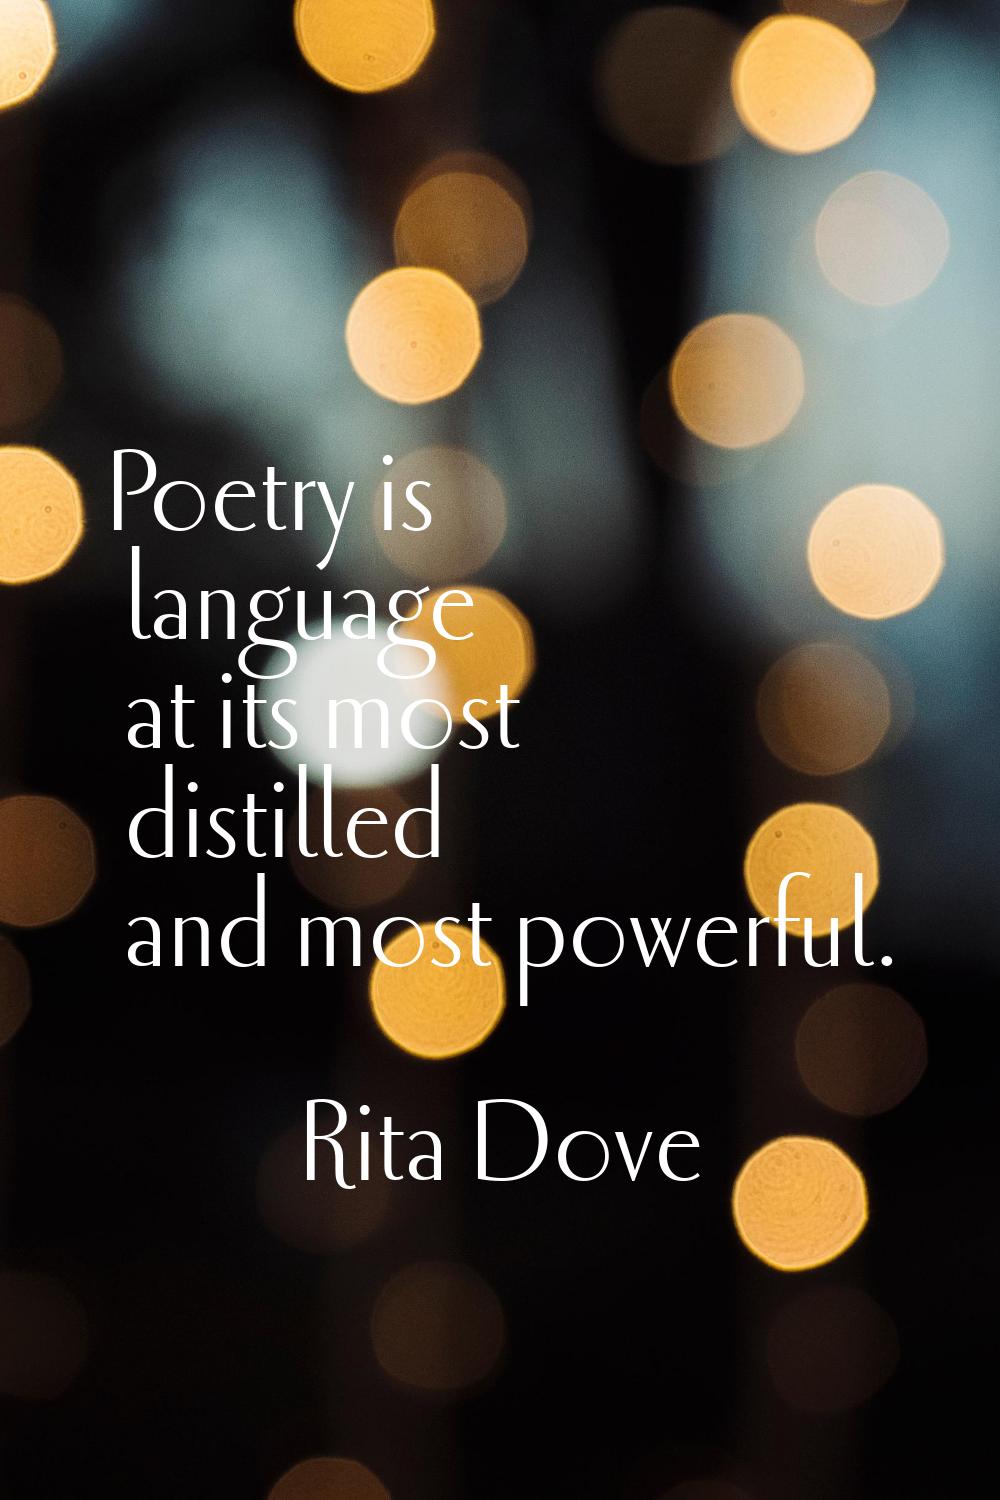 Poetry is language at its most distilled and most powerful.